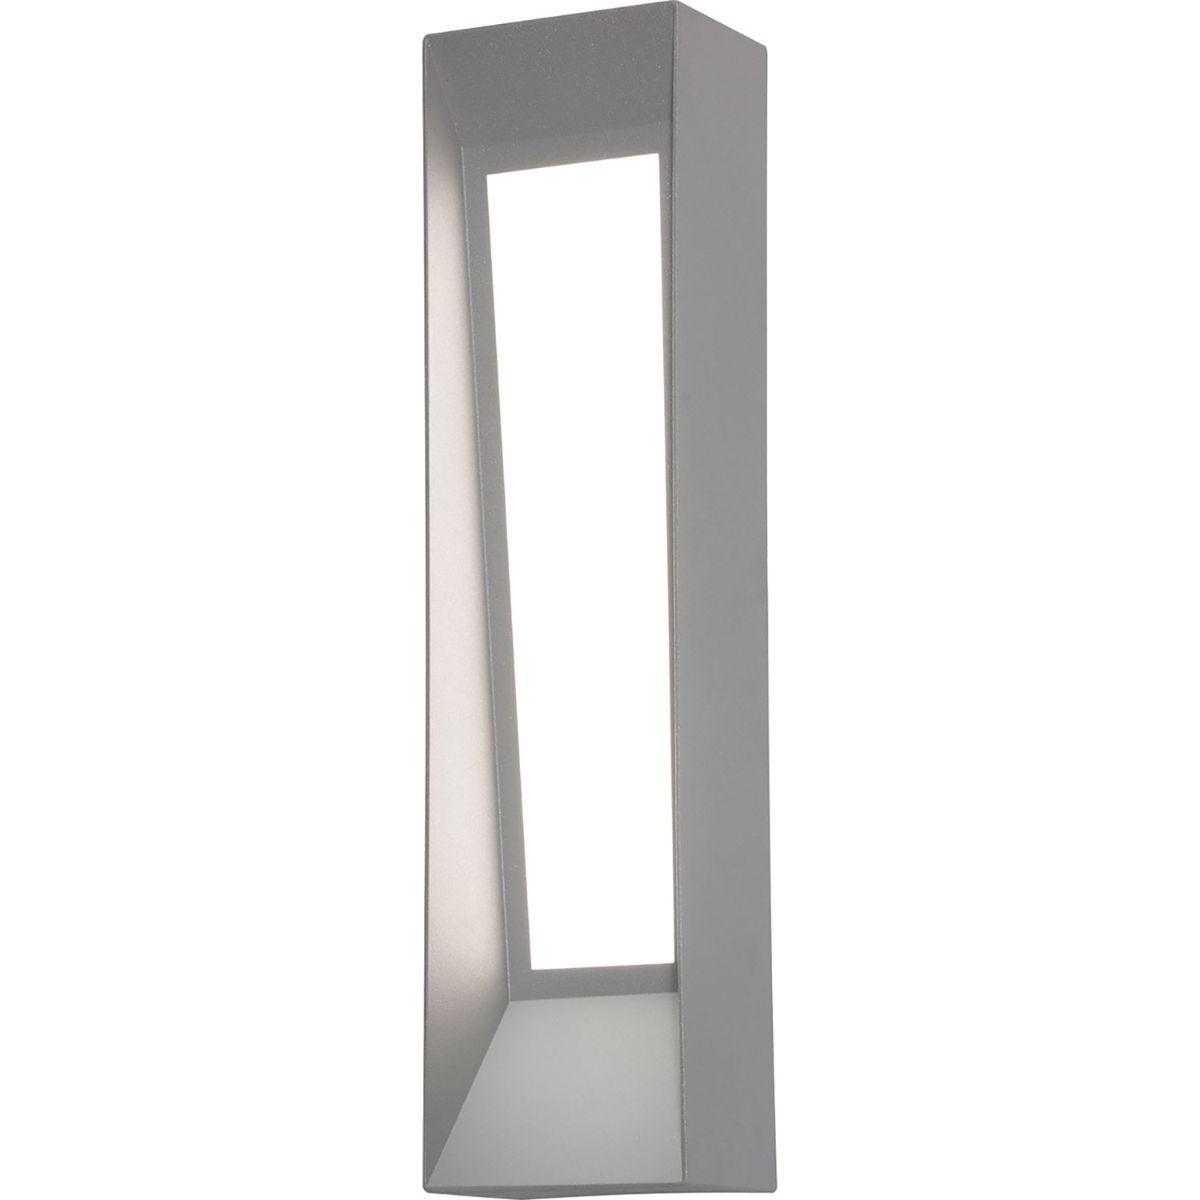 Rowan 20 in. LED Outdoor Wall Sconce